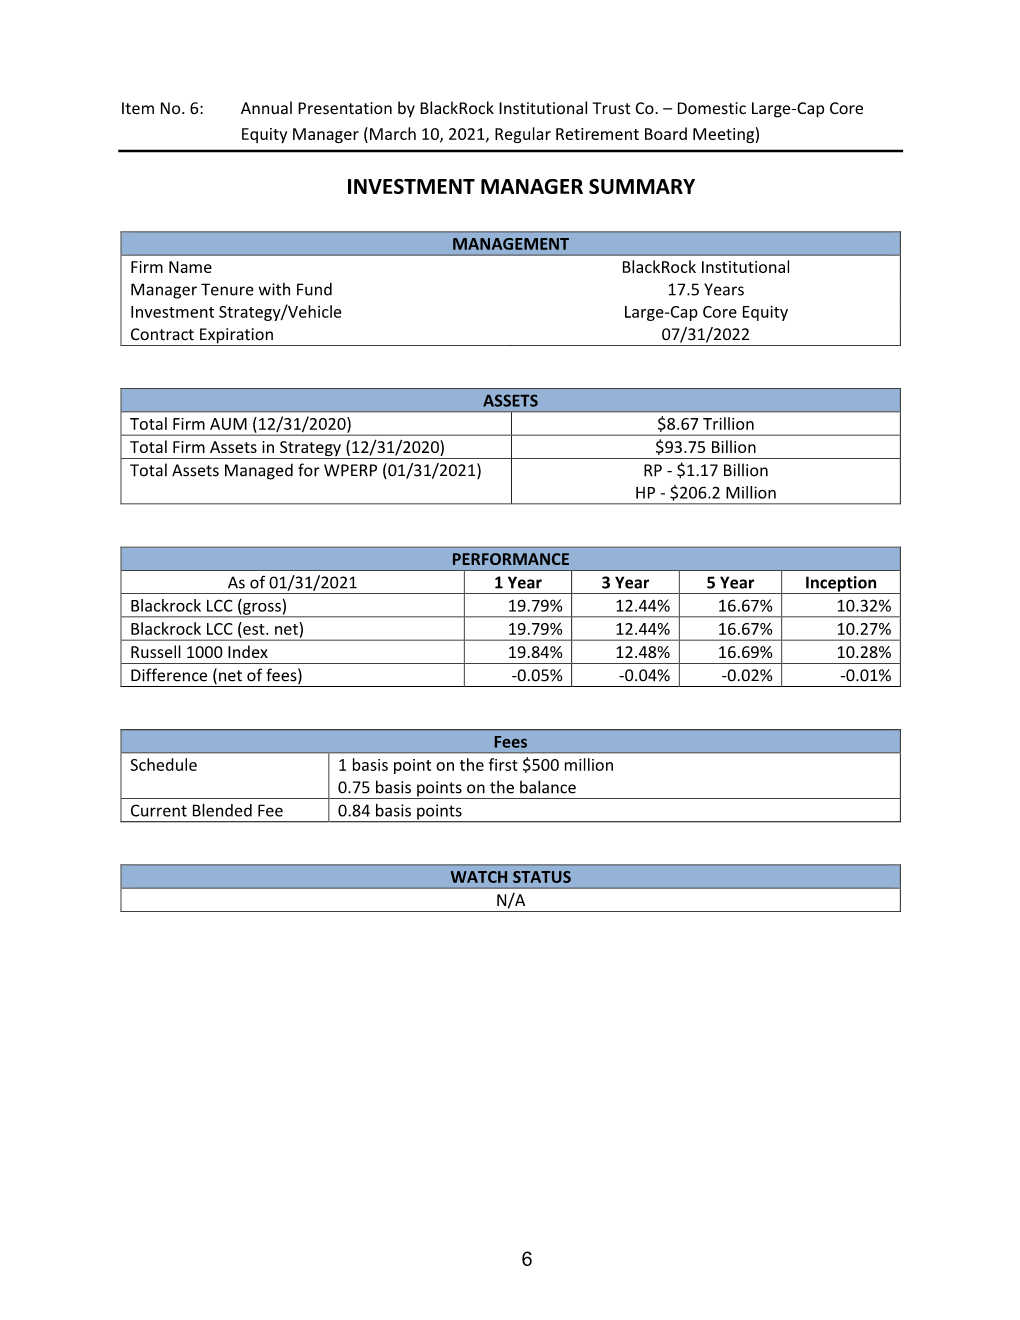 Investment Manager Summary